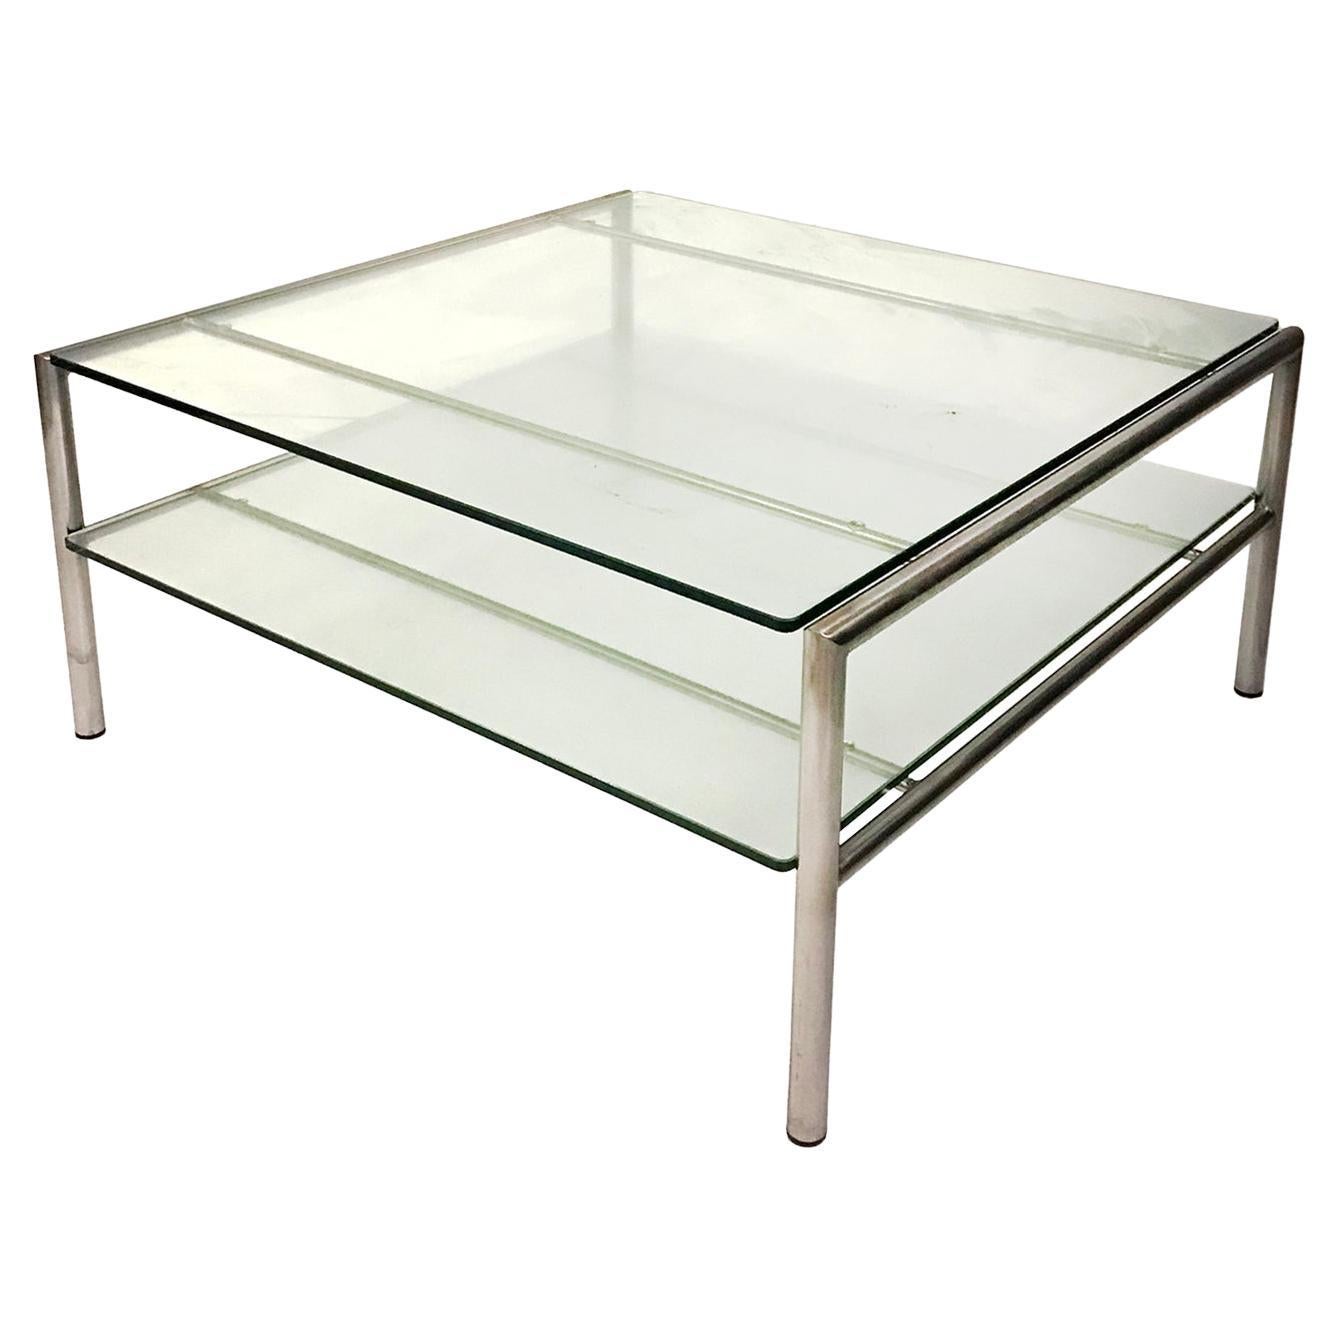 1965, Martin Visser, Rare Double Glas Coffee Table Designed for SzZ01 Easy Chair For Sale